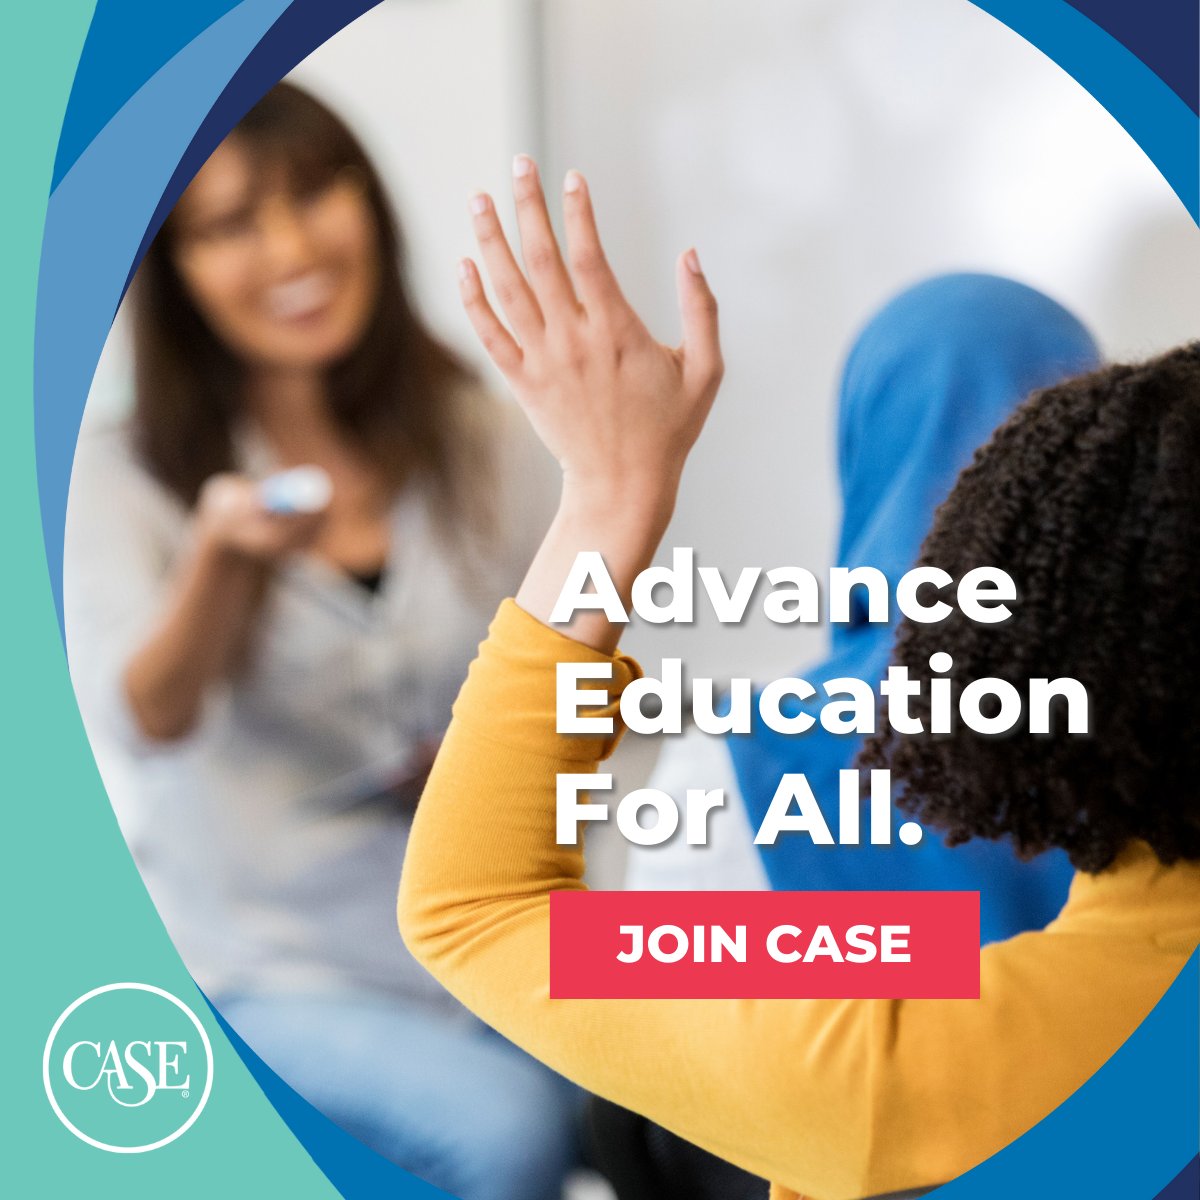 Join CASE Insights today and get access to our exclusive research and insights. You'll also be the first to know about new tools and resources that can help you advance education for all. Learn more and become a member: hubs.ly/Q023RfMY0